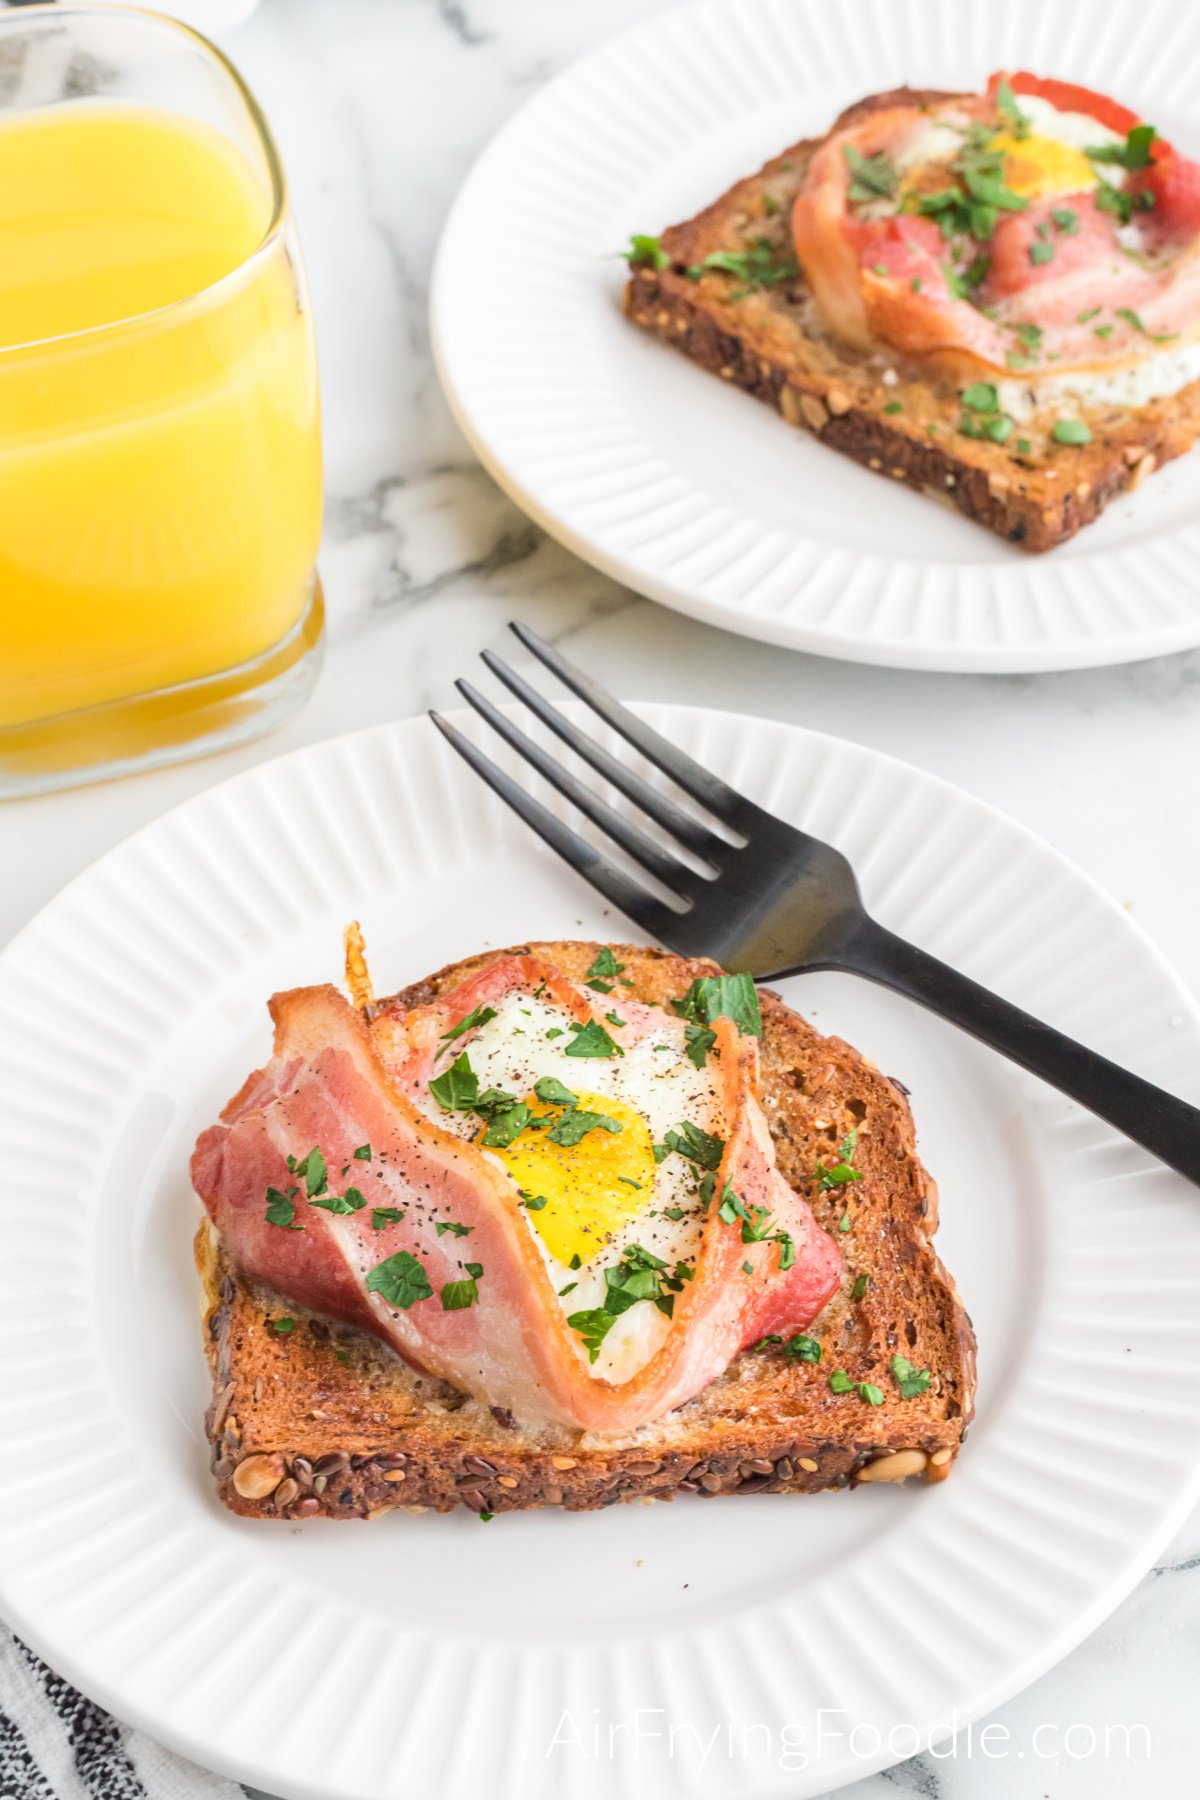 Easy and healthy air fryer breakfast recipes